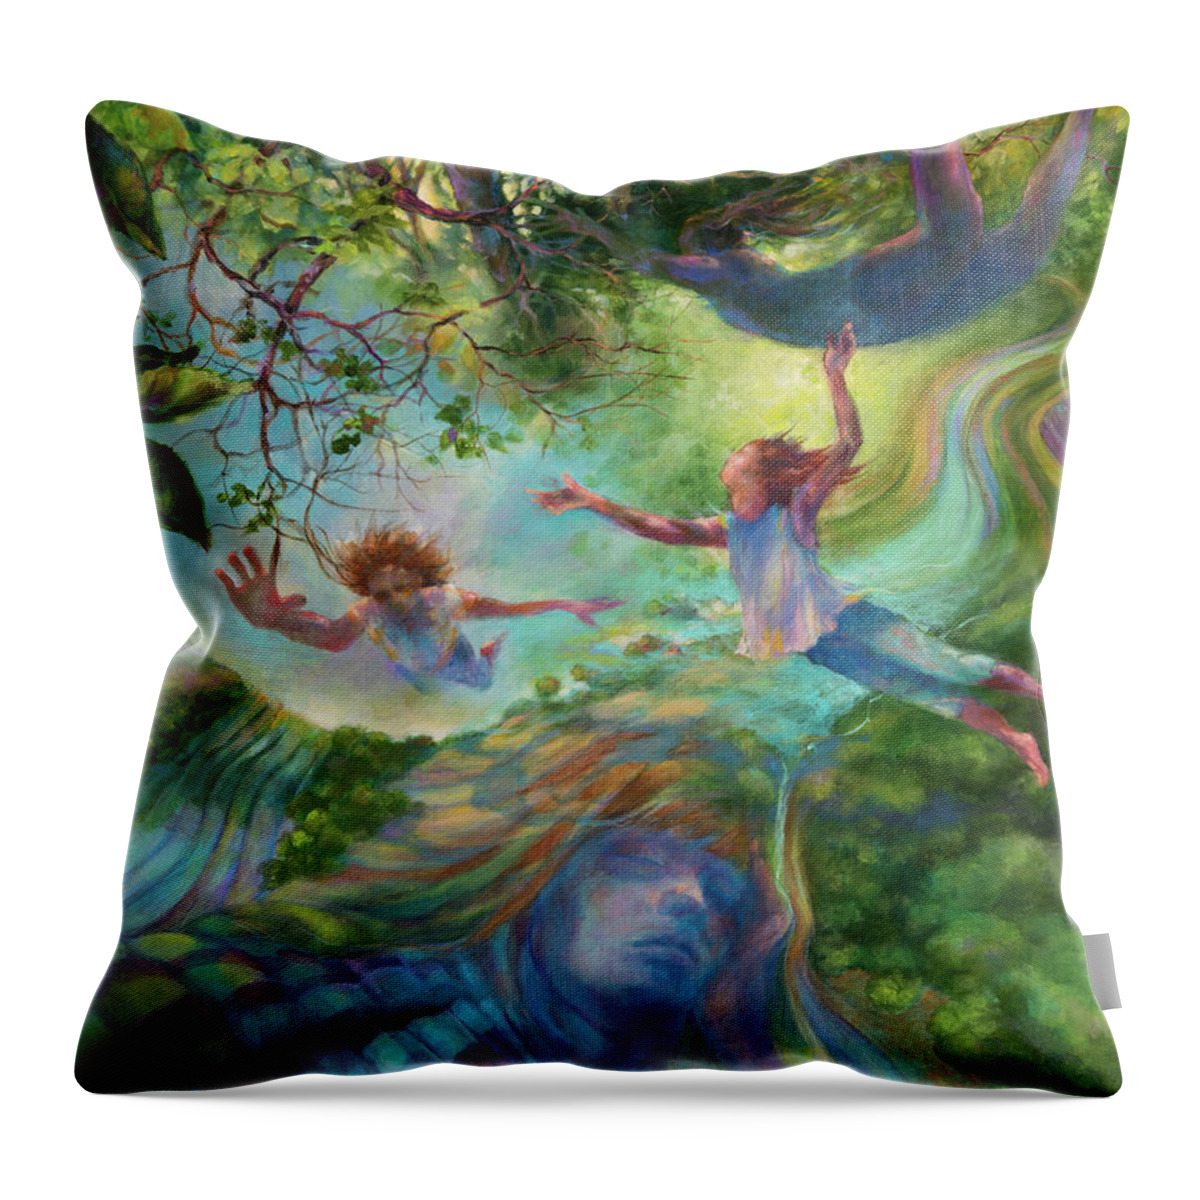 Flying Throw Pillow featuring the painting The Dream by Carol Klingel